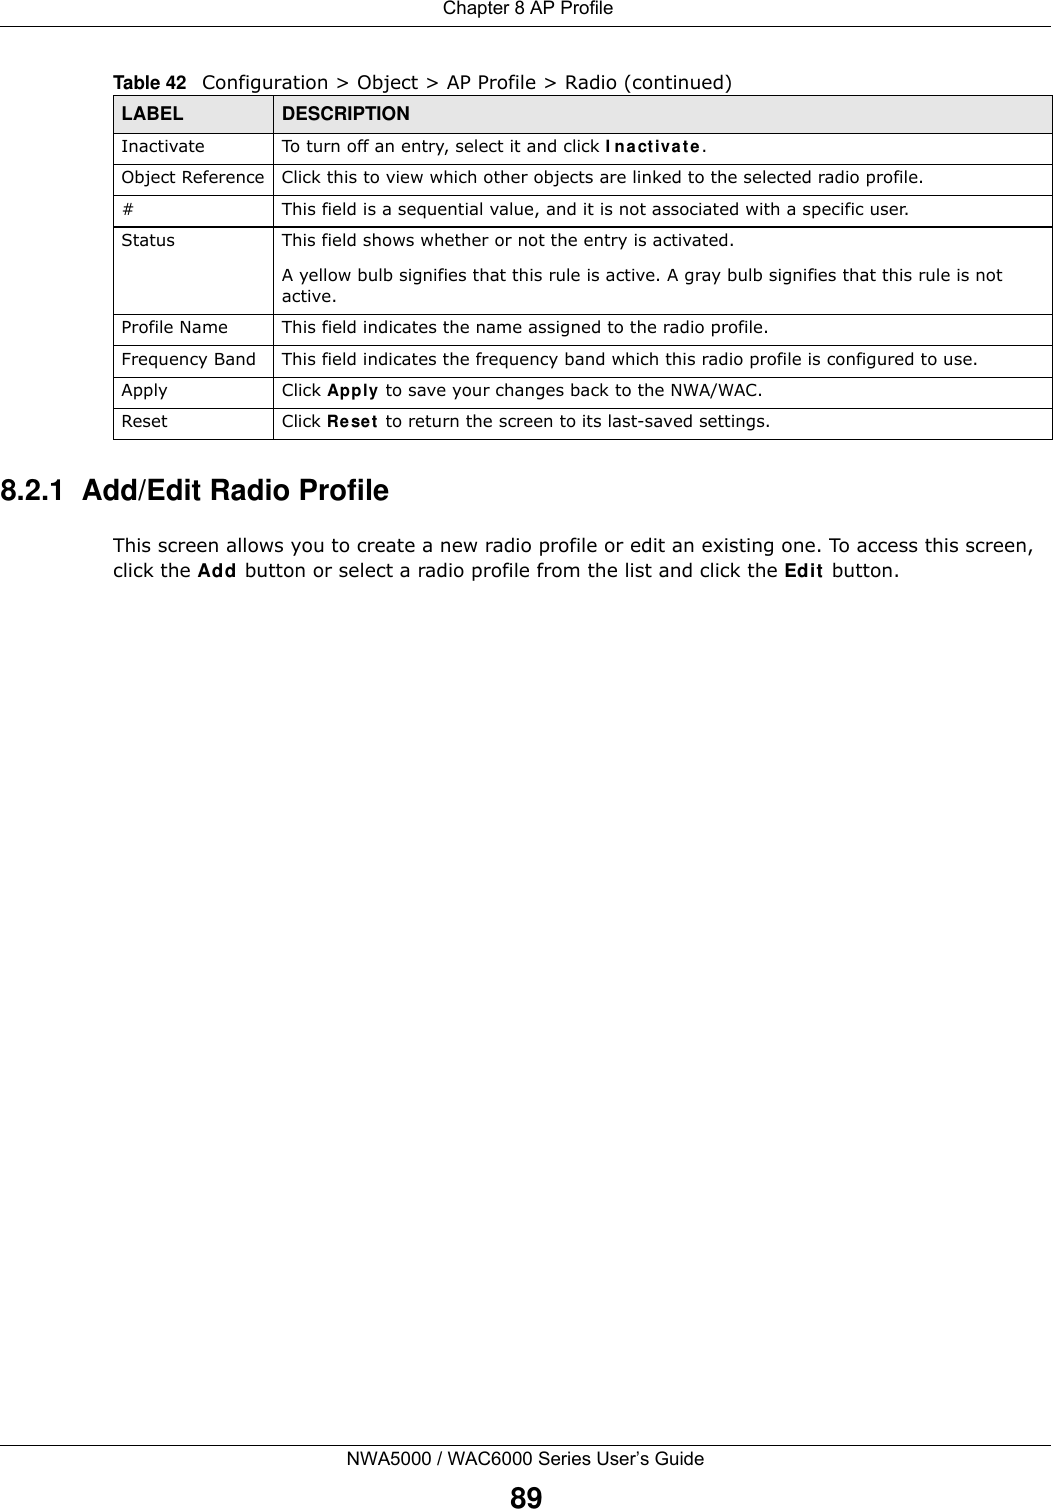  Chapter 8 AP ProfileNWA5000 / WAC6000 Series User’s Guide898.2.1  Add/Edit Radio ProfileThis screen allows you to create a new radio profile or edit an existing one. To access this screen, click the Add button or select a radio profile from the list and click the Edit button. Inactivate To turn off an entry, select it and click Inactivate.Object Reference Click this to view which other objects are linked to the selected radio profile.# This field is a sequential value, and it is not associated with a specific user.Status This field shows whether or not the entry is activated.A yellow bulb signifies that this rule is active. A gray bulb signifies that this rule is not active.Profile Name This field indicates the name assigned to the radio profile.Frequency Band This field indicates the frequency band which this radio profile is configured to use.Apply Click Apply to save your changes back to the NWA/WAC.Reset Click Reset to return the screen to its last-saved settings.Table 42   Configuration &gt; Object &gt; AP Profile &gt; Radio (continued)LABEL DESCRIPTION